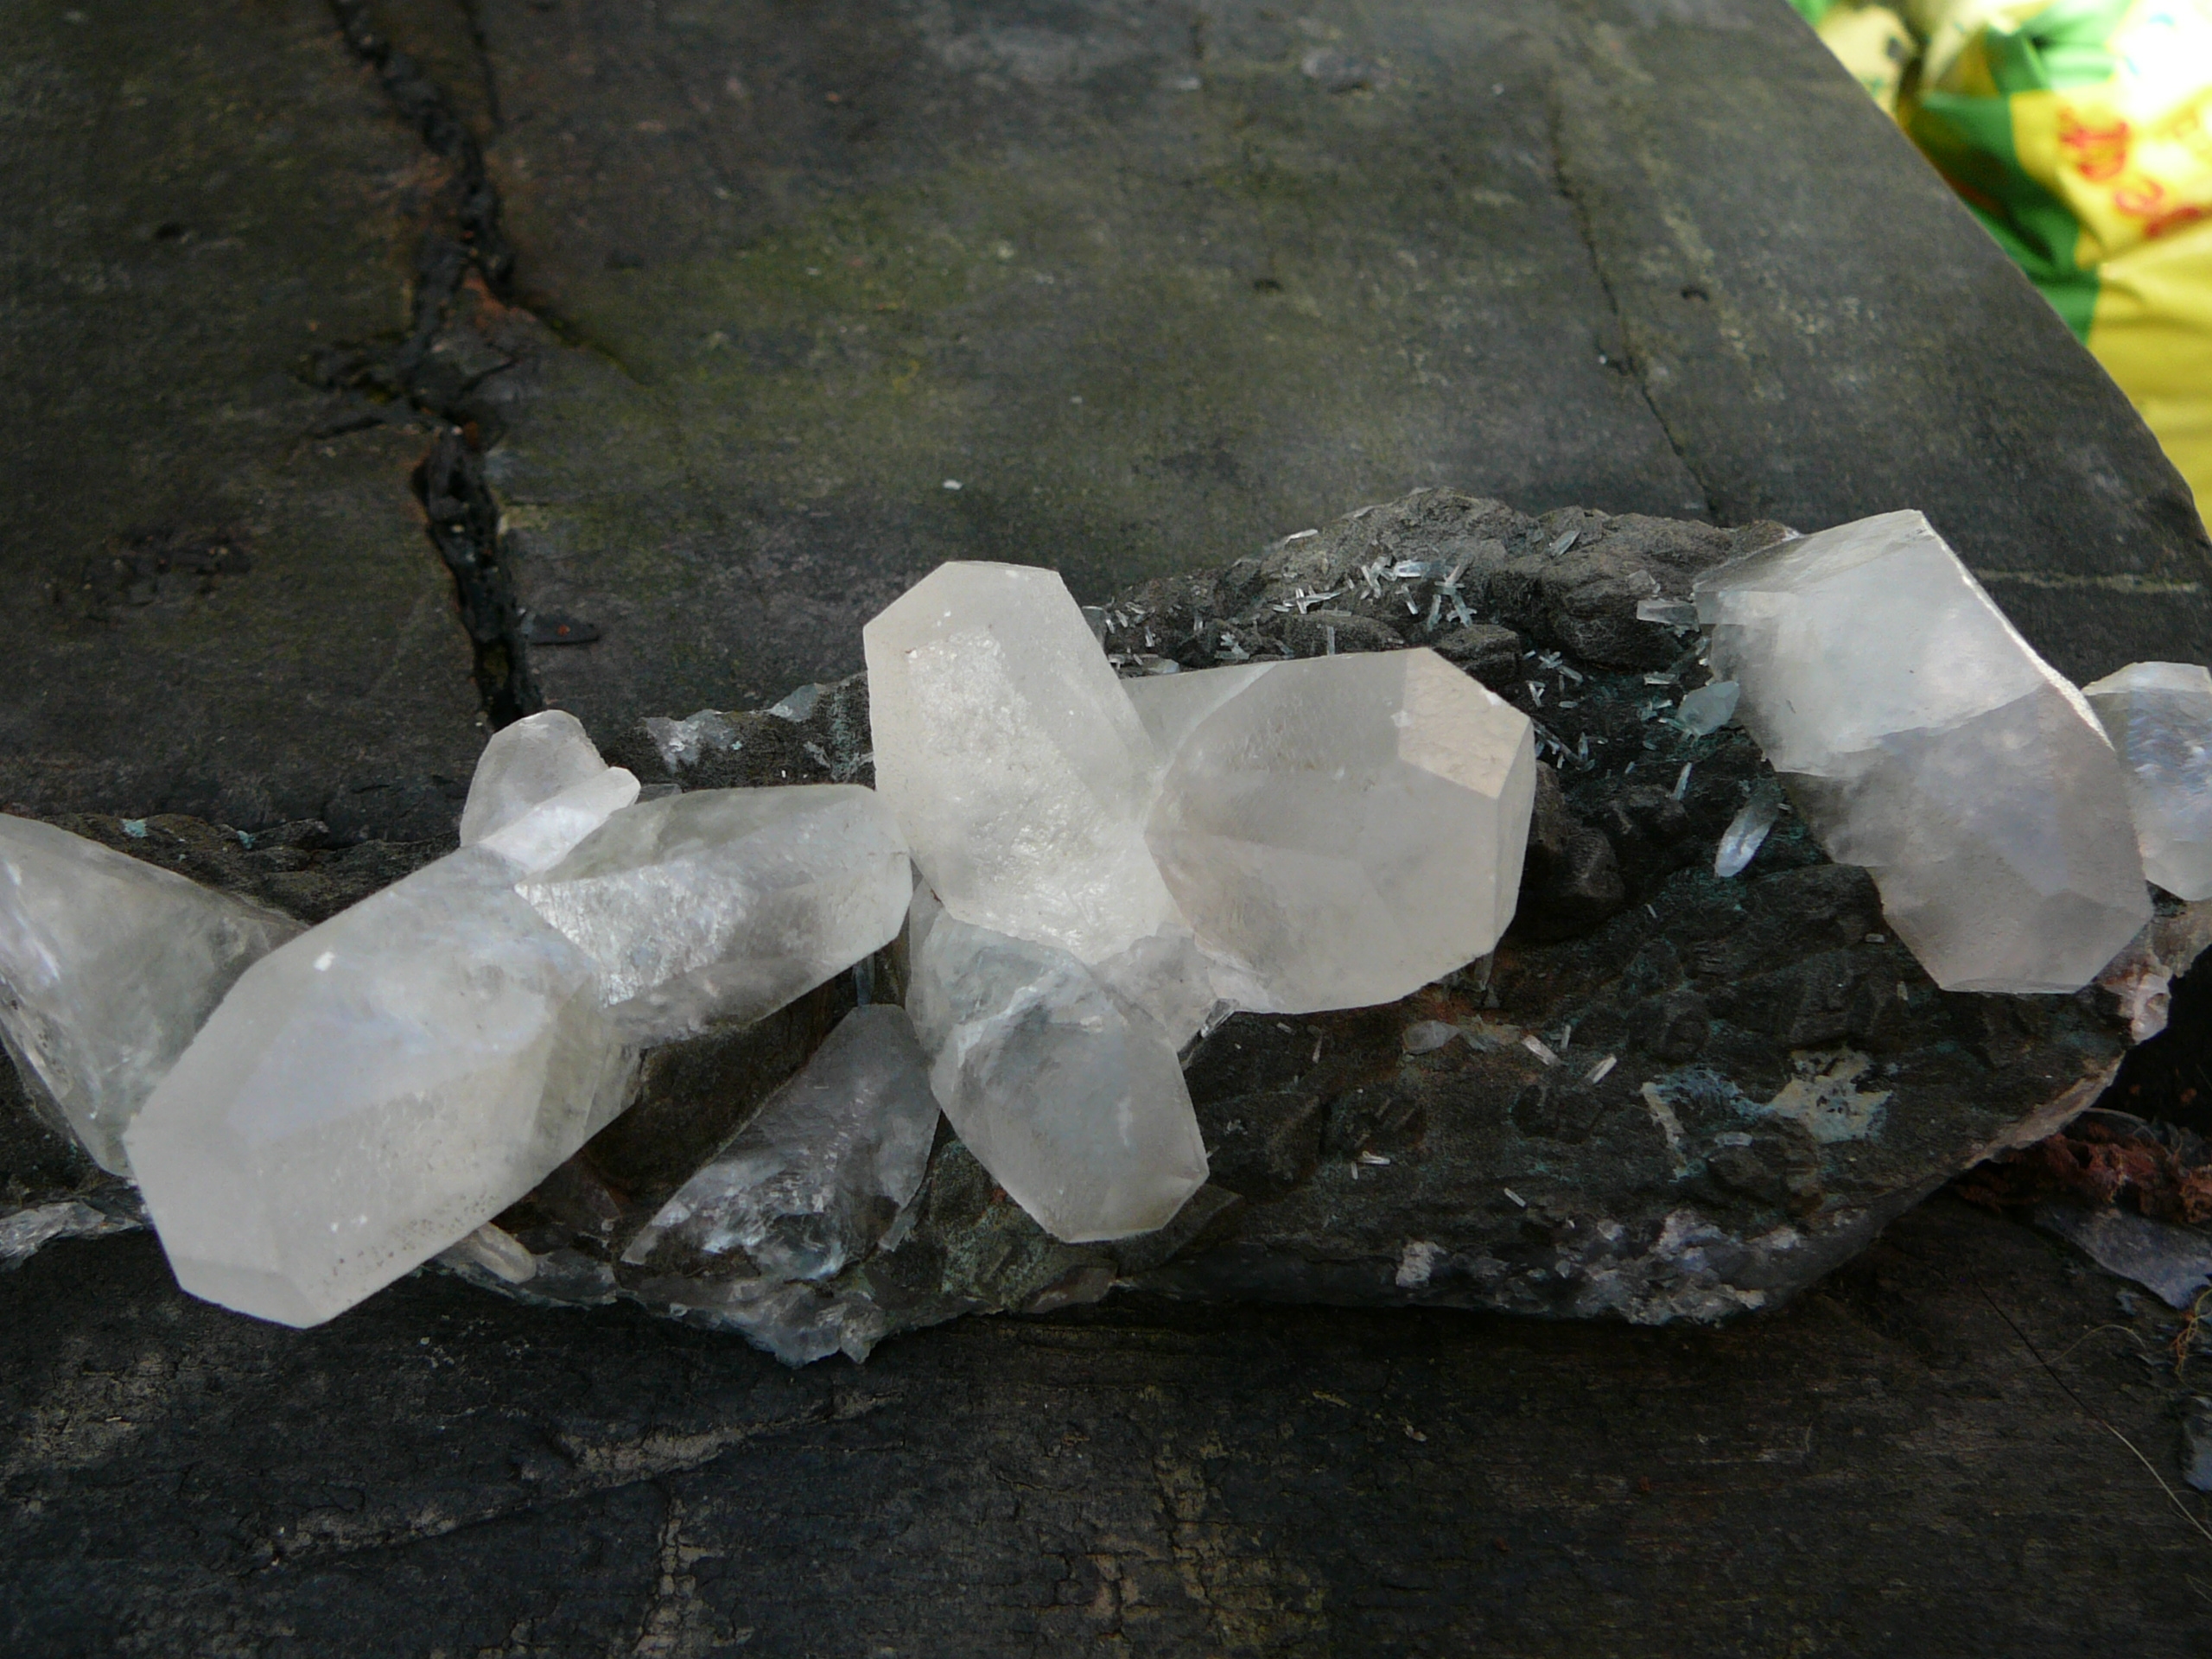 Calcite clusters on a thin quartz layer